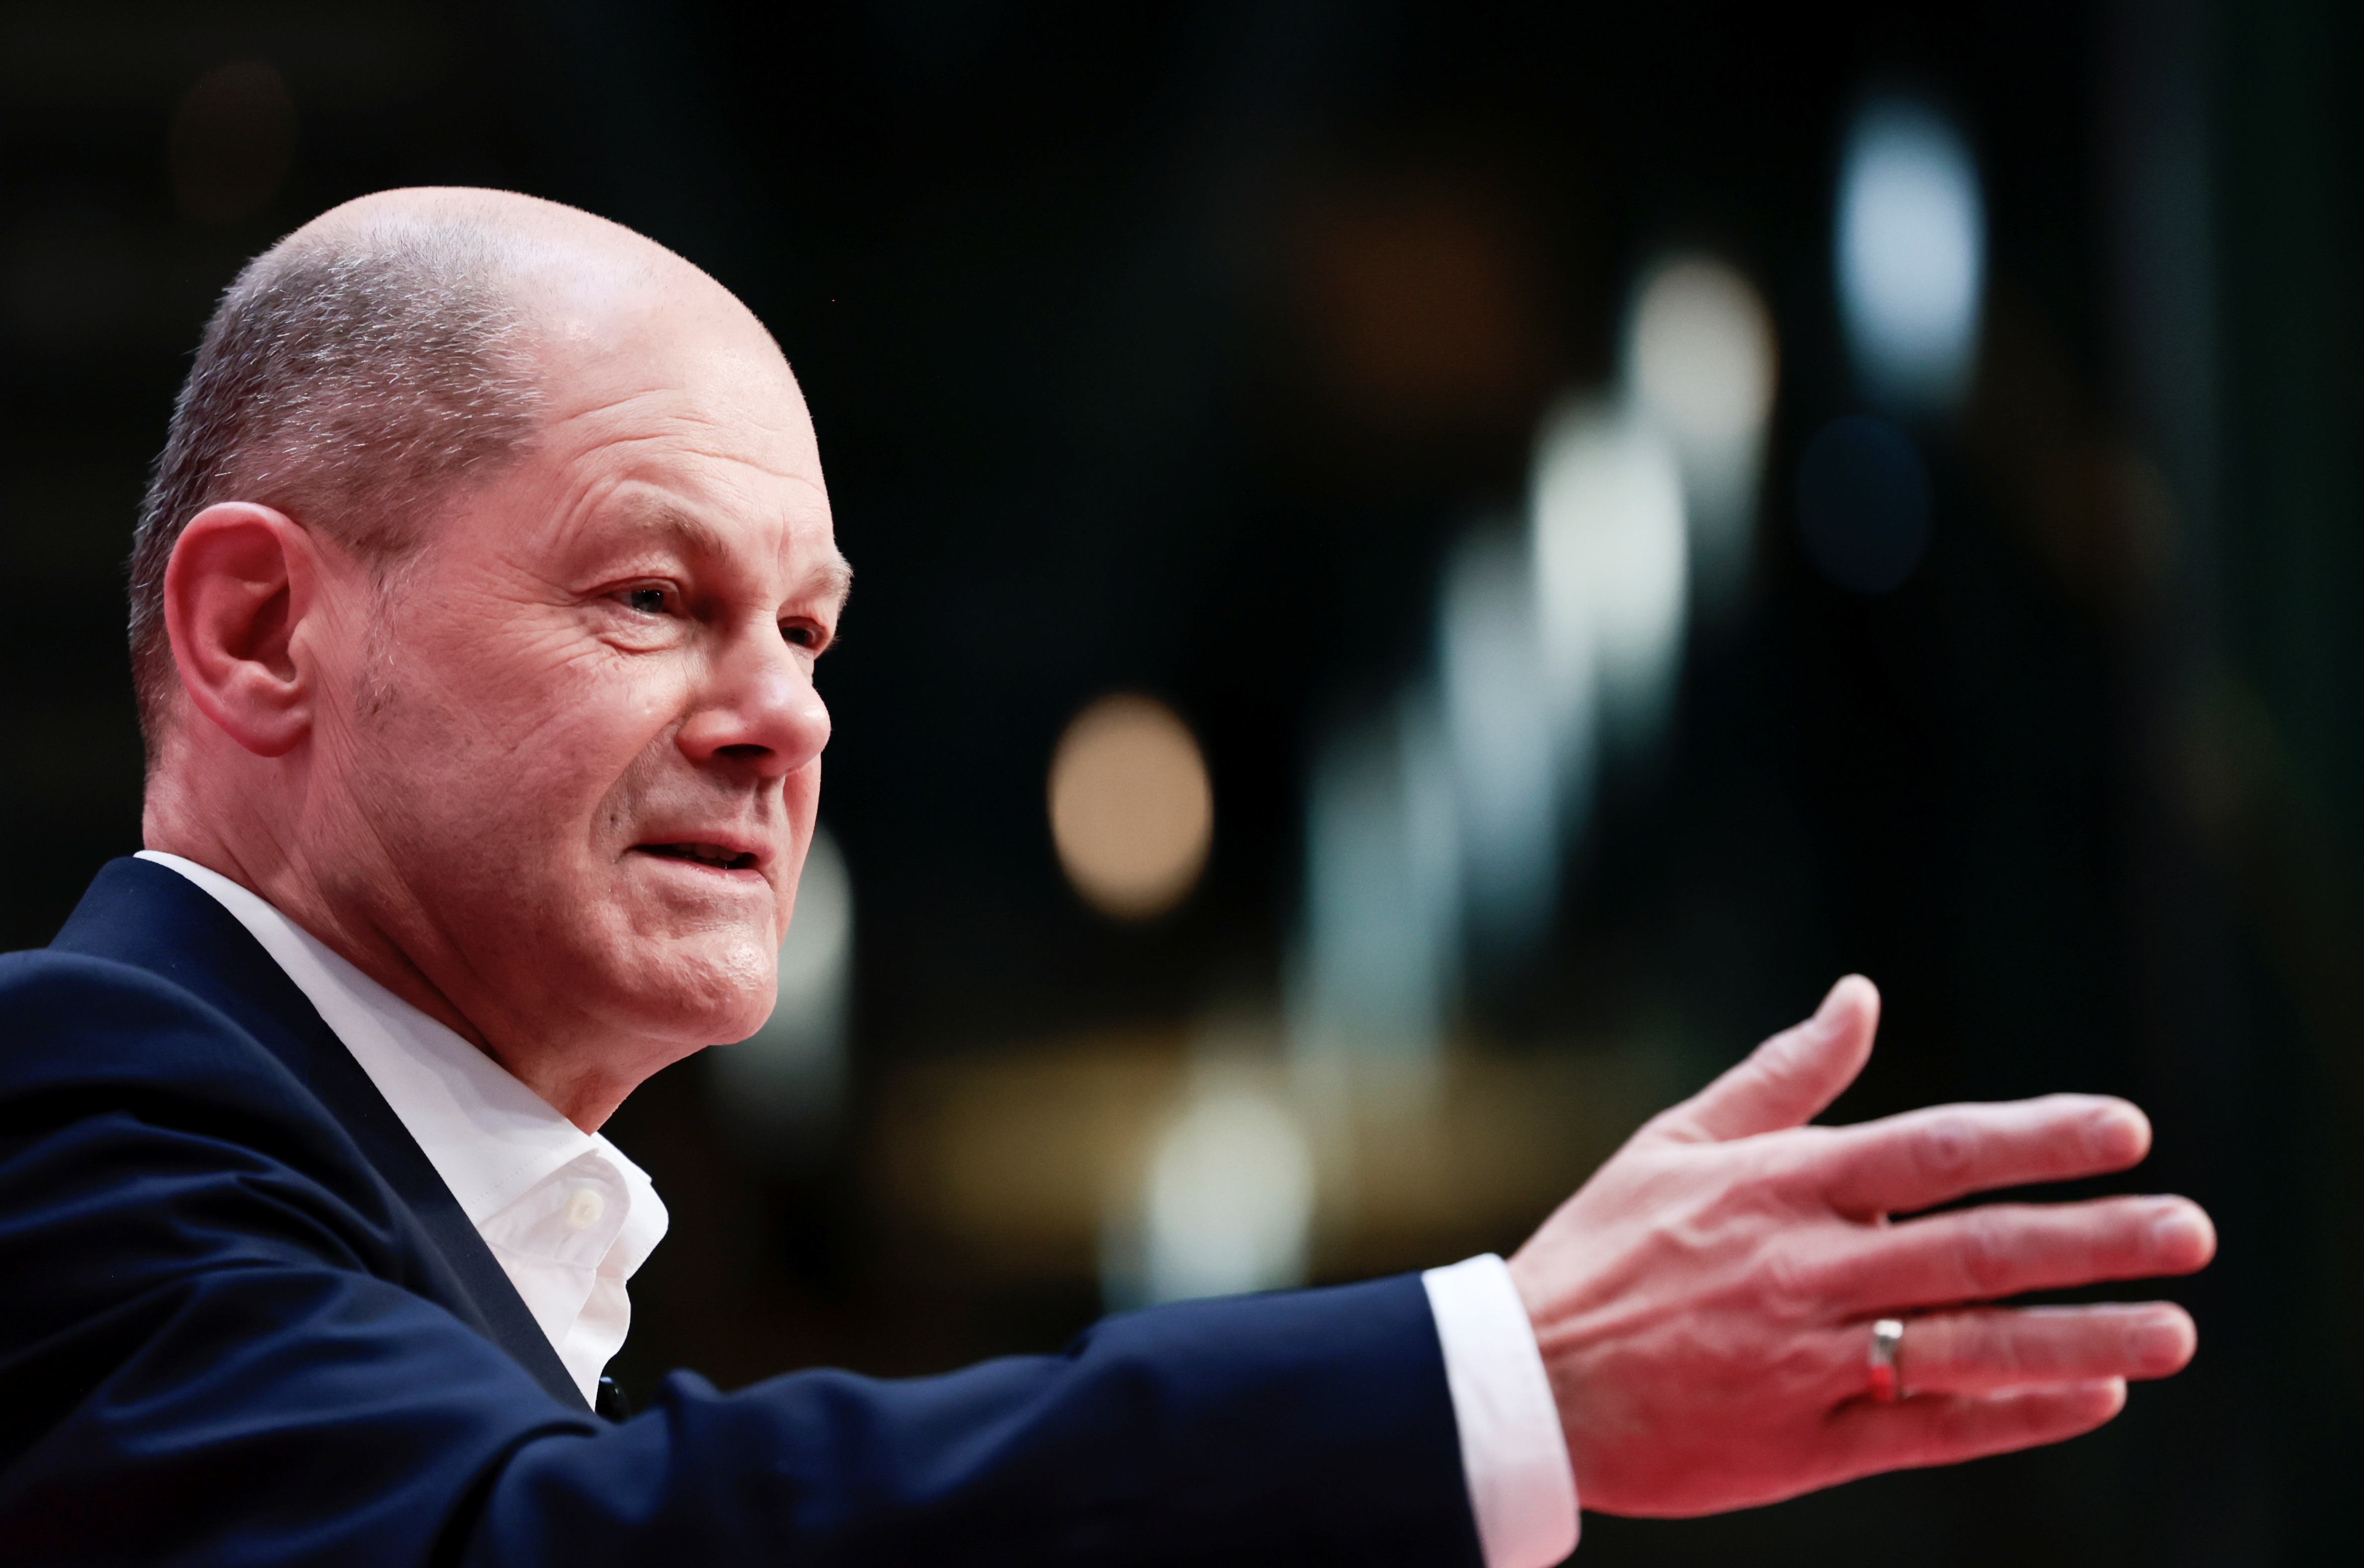 Germany's Social Democratic Party (SPD) candidate for chancellor Olaf Scholz attends a hybrid party conference for the approval of the traffic light coalition agreement at the party headquarters in Berlin, Germany, December 4, 2021. REUTERS/Hannibal Hanschke/Pool